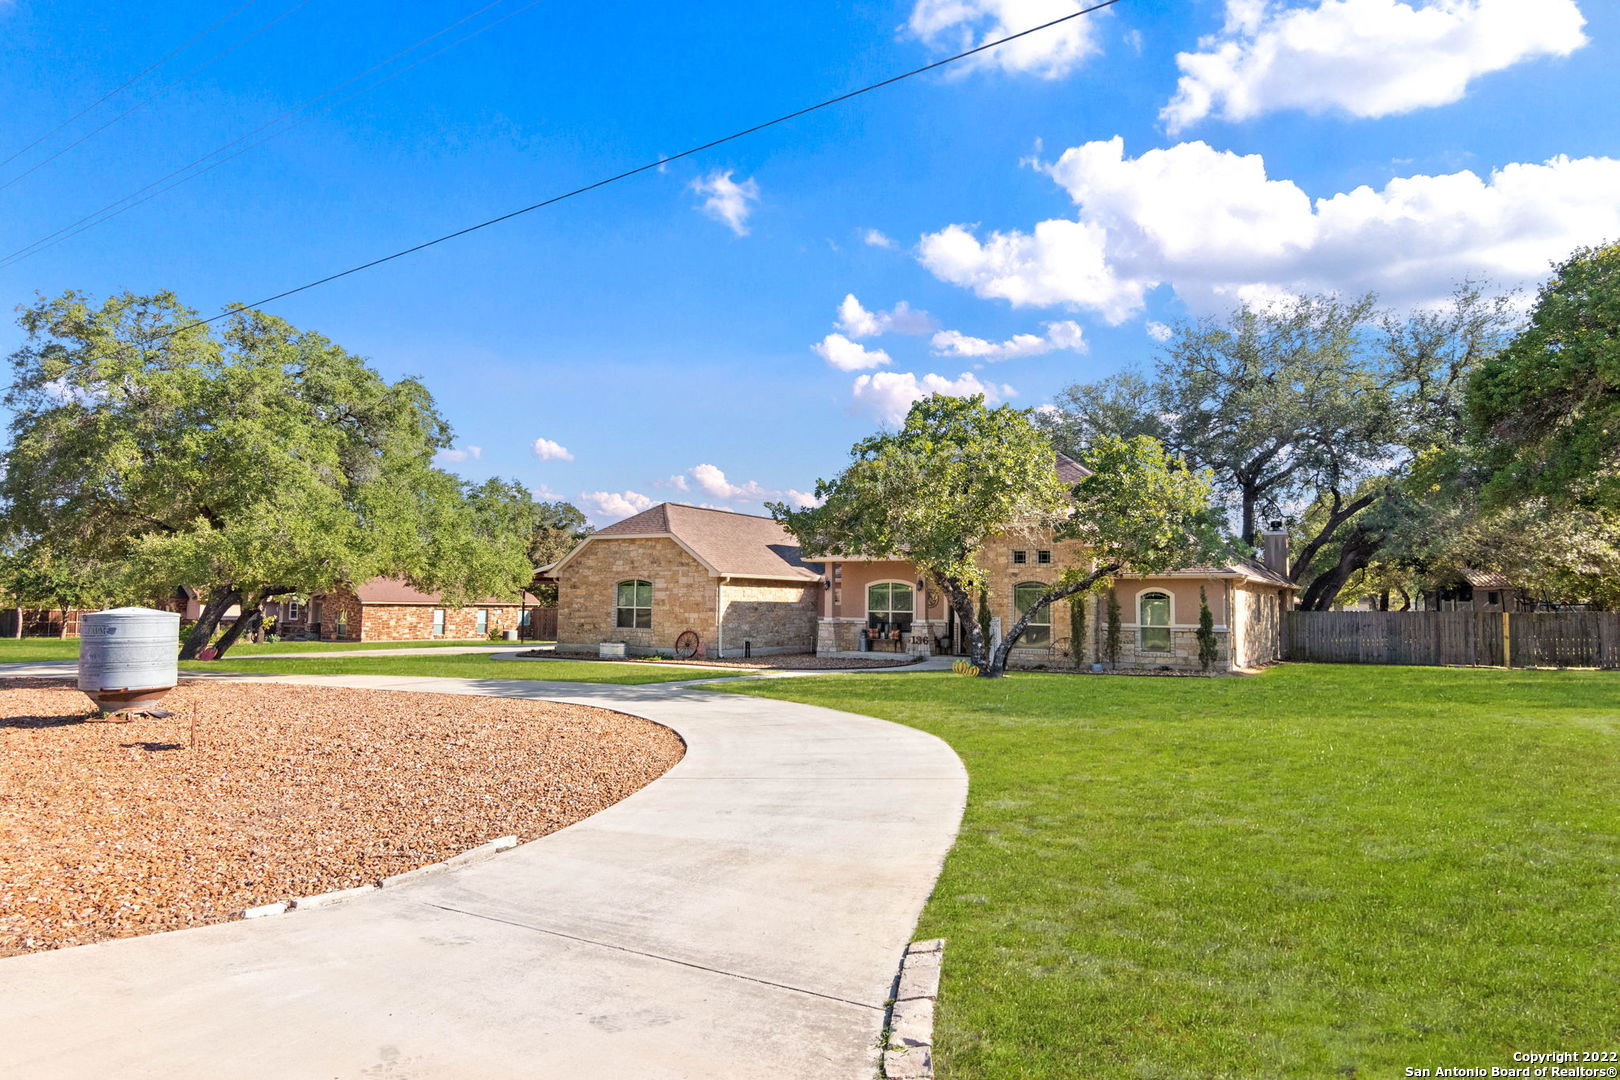 This stunning custom home is located in a highly desirable community and is a must see! The property sits on over an acre of mature oak trees, has rock landscaping, and   features a roundabout drive way, perfect for guest use. Recently installed, a Rainbird sprinkler system is located in both the front and back yard. In addition, a large 28X40 metal shop, built in November 2019, features a 26' overhang/carport, a vast amount of space, drive through garage doors, and electricity both inside and out. Fully upgraded throughout: The home opens to an spacious, open concept floor plan and features abundant natural lighting throughout. The upgraded cabinetry, massive granite countertops, beautifully designed rockwork, and upgraded appliances make this kitchen a home chef's dream! Spacious bedrooms feature high ceilings and walk in closets. The spa like master bath illuminates what it means to relax with it's garden tub, large walk in shower, and dual vanities. Relax fireside on your extended covered patio or take a dip in your custom 27' stock tank pool, the features are endless!      *Agent is married to seller